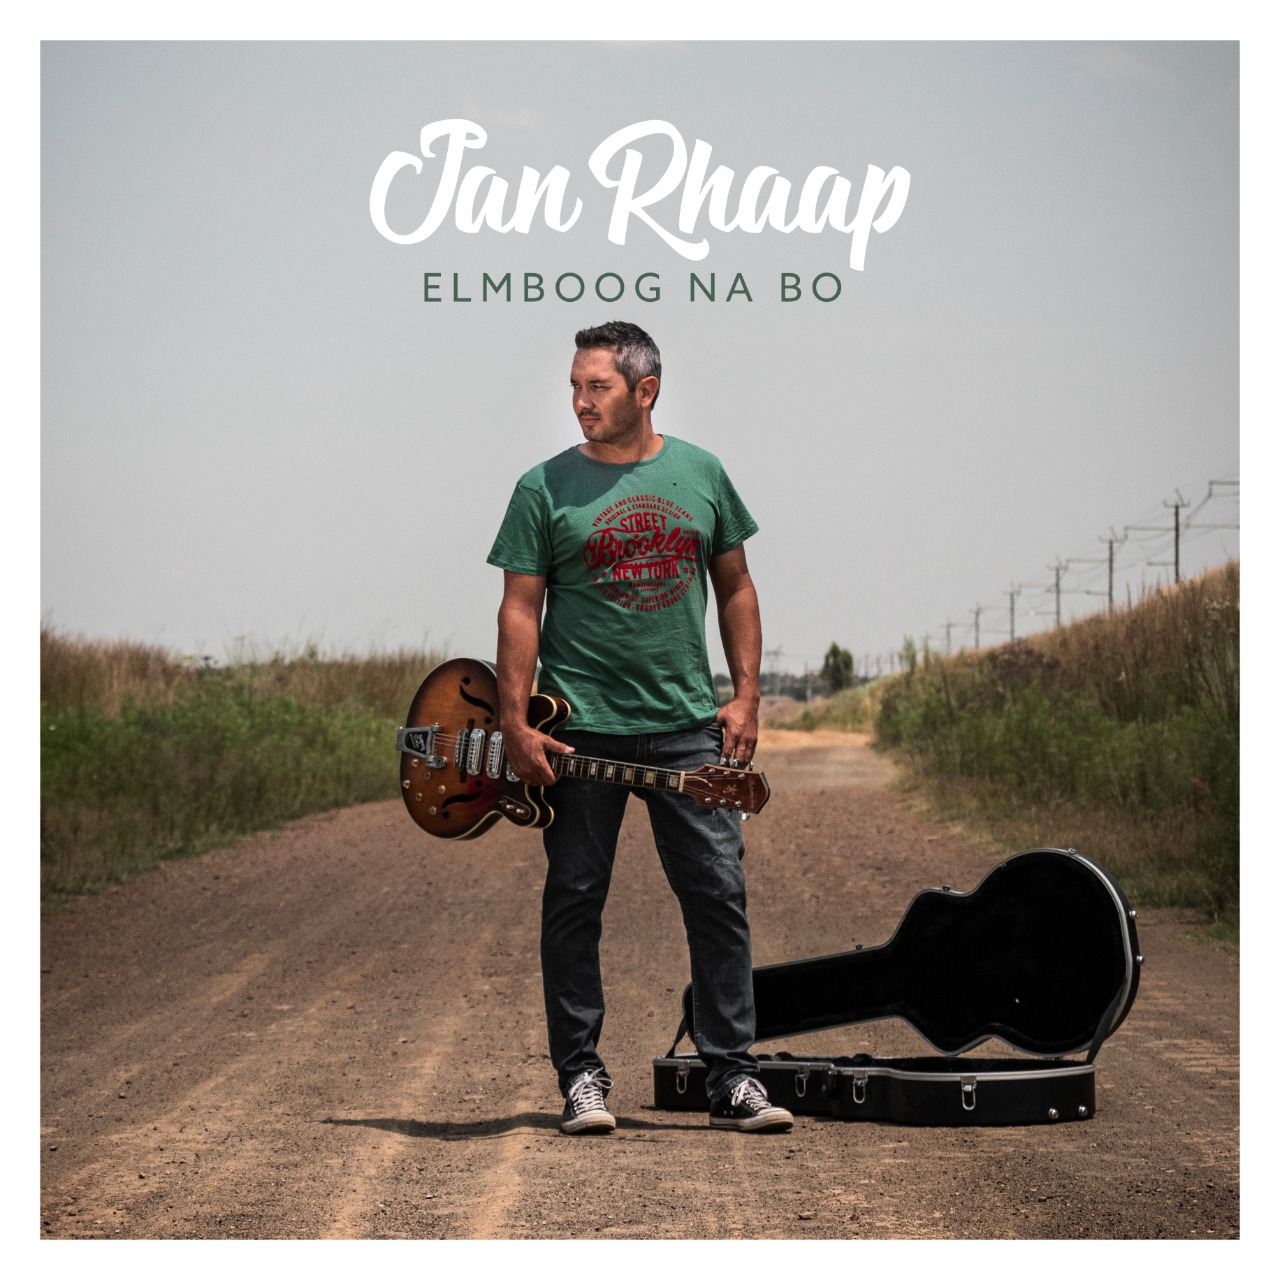 Jan Rhaap with a new single and album